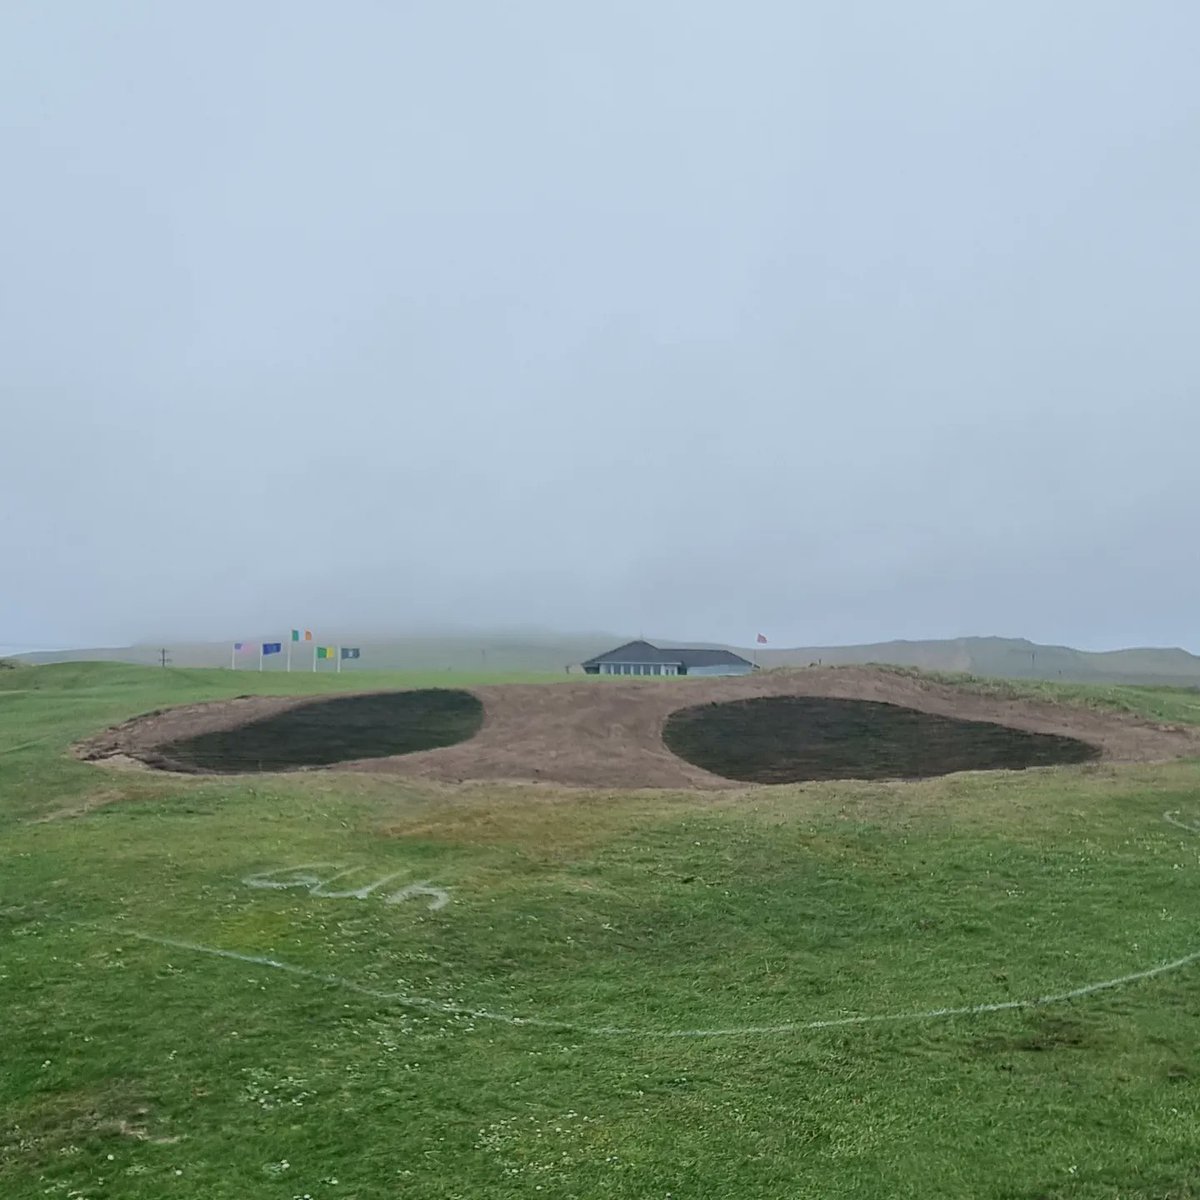 One last tweak before the season. The dreaded natural bunker short right of 9th green has been split into two riveted pot bunkers. Huge improvement to playability should you end up in there this summer....which, of course, you shouldn't! 🙃⛳🙌 #ceannsibeal #corcadhuibhne